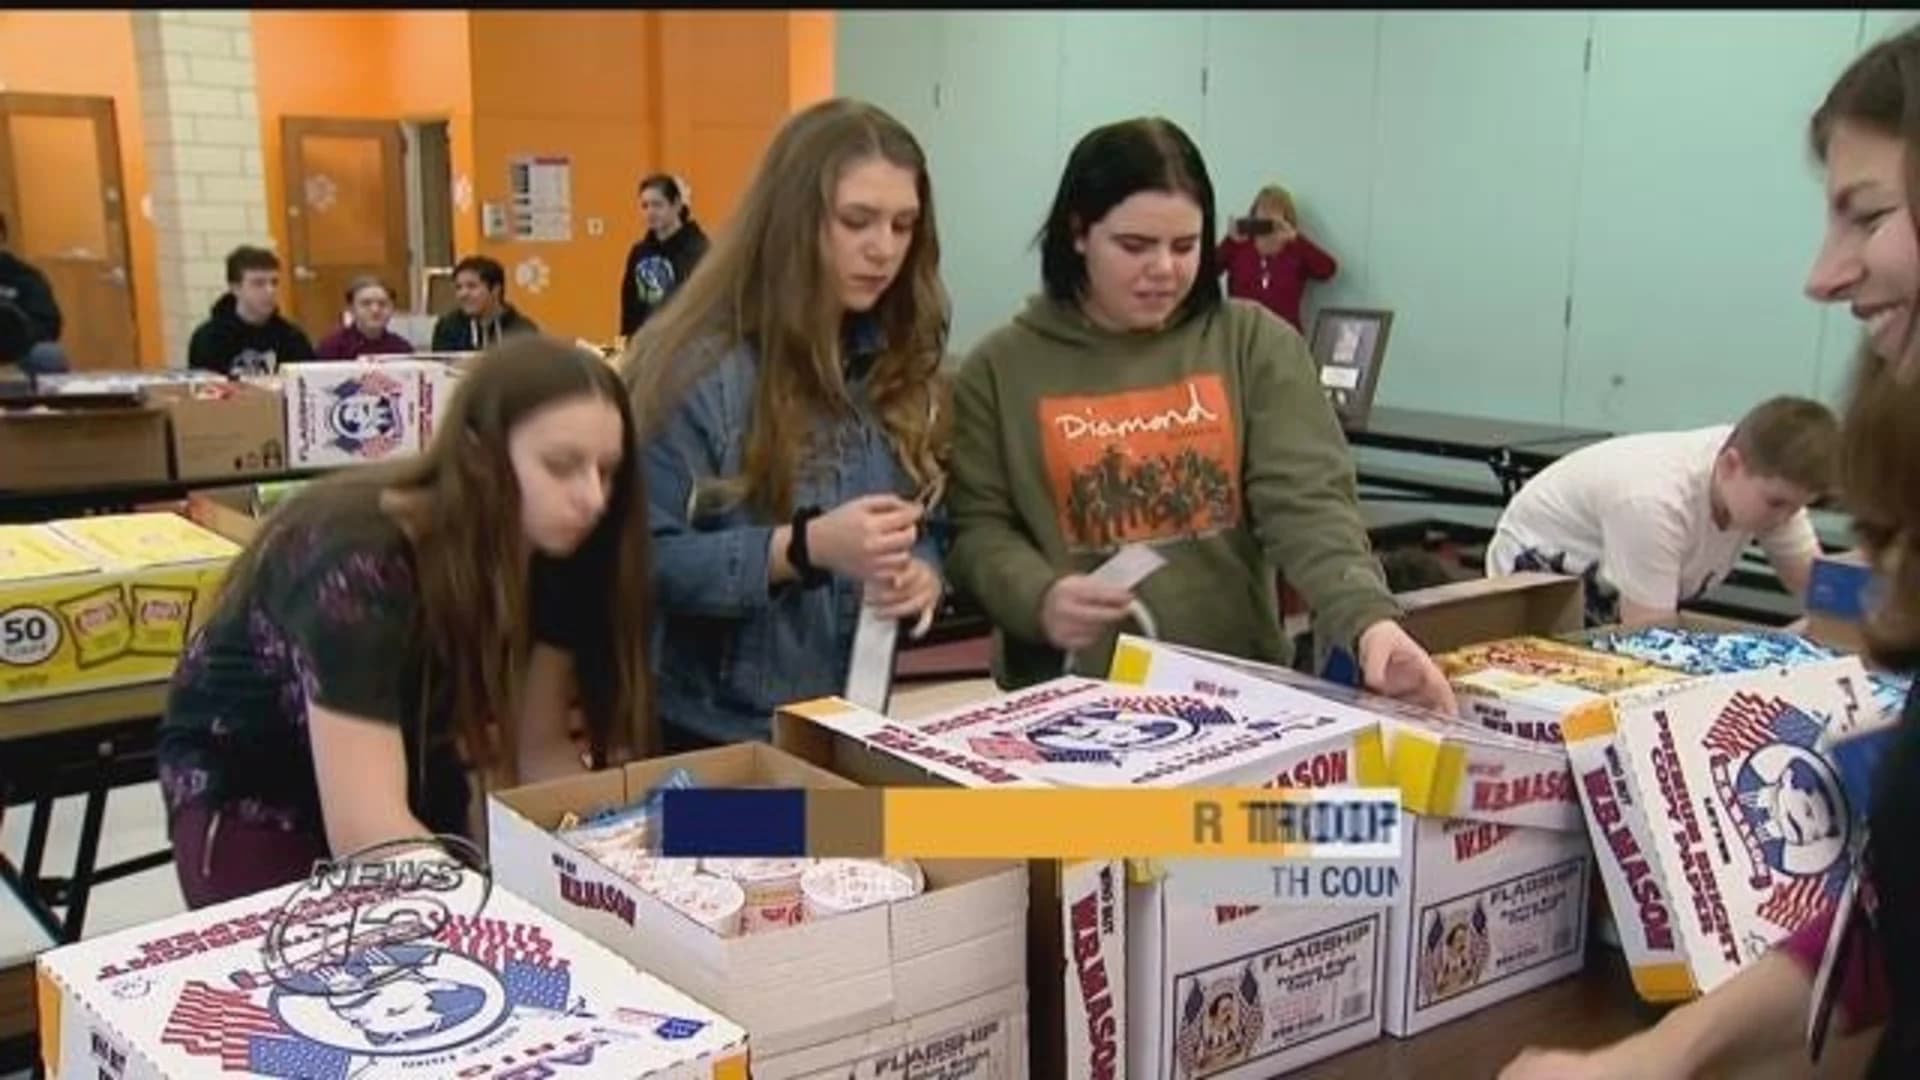 Students make care packages for troops to honor fallen soldier